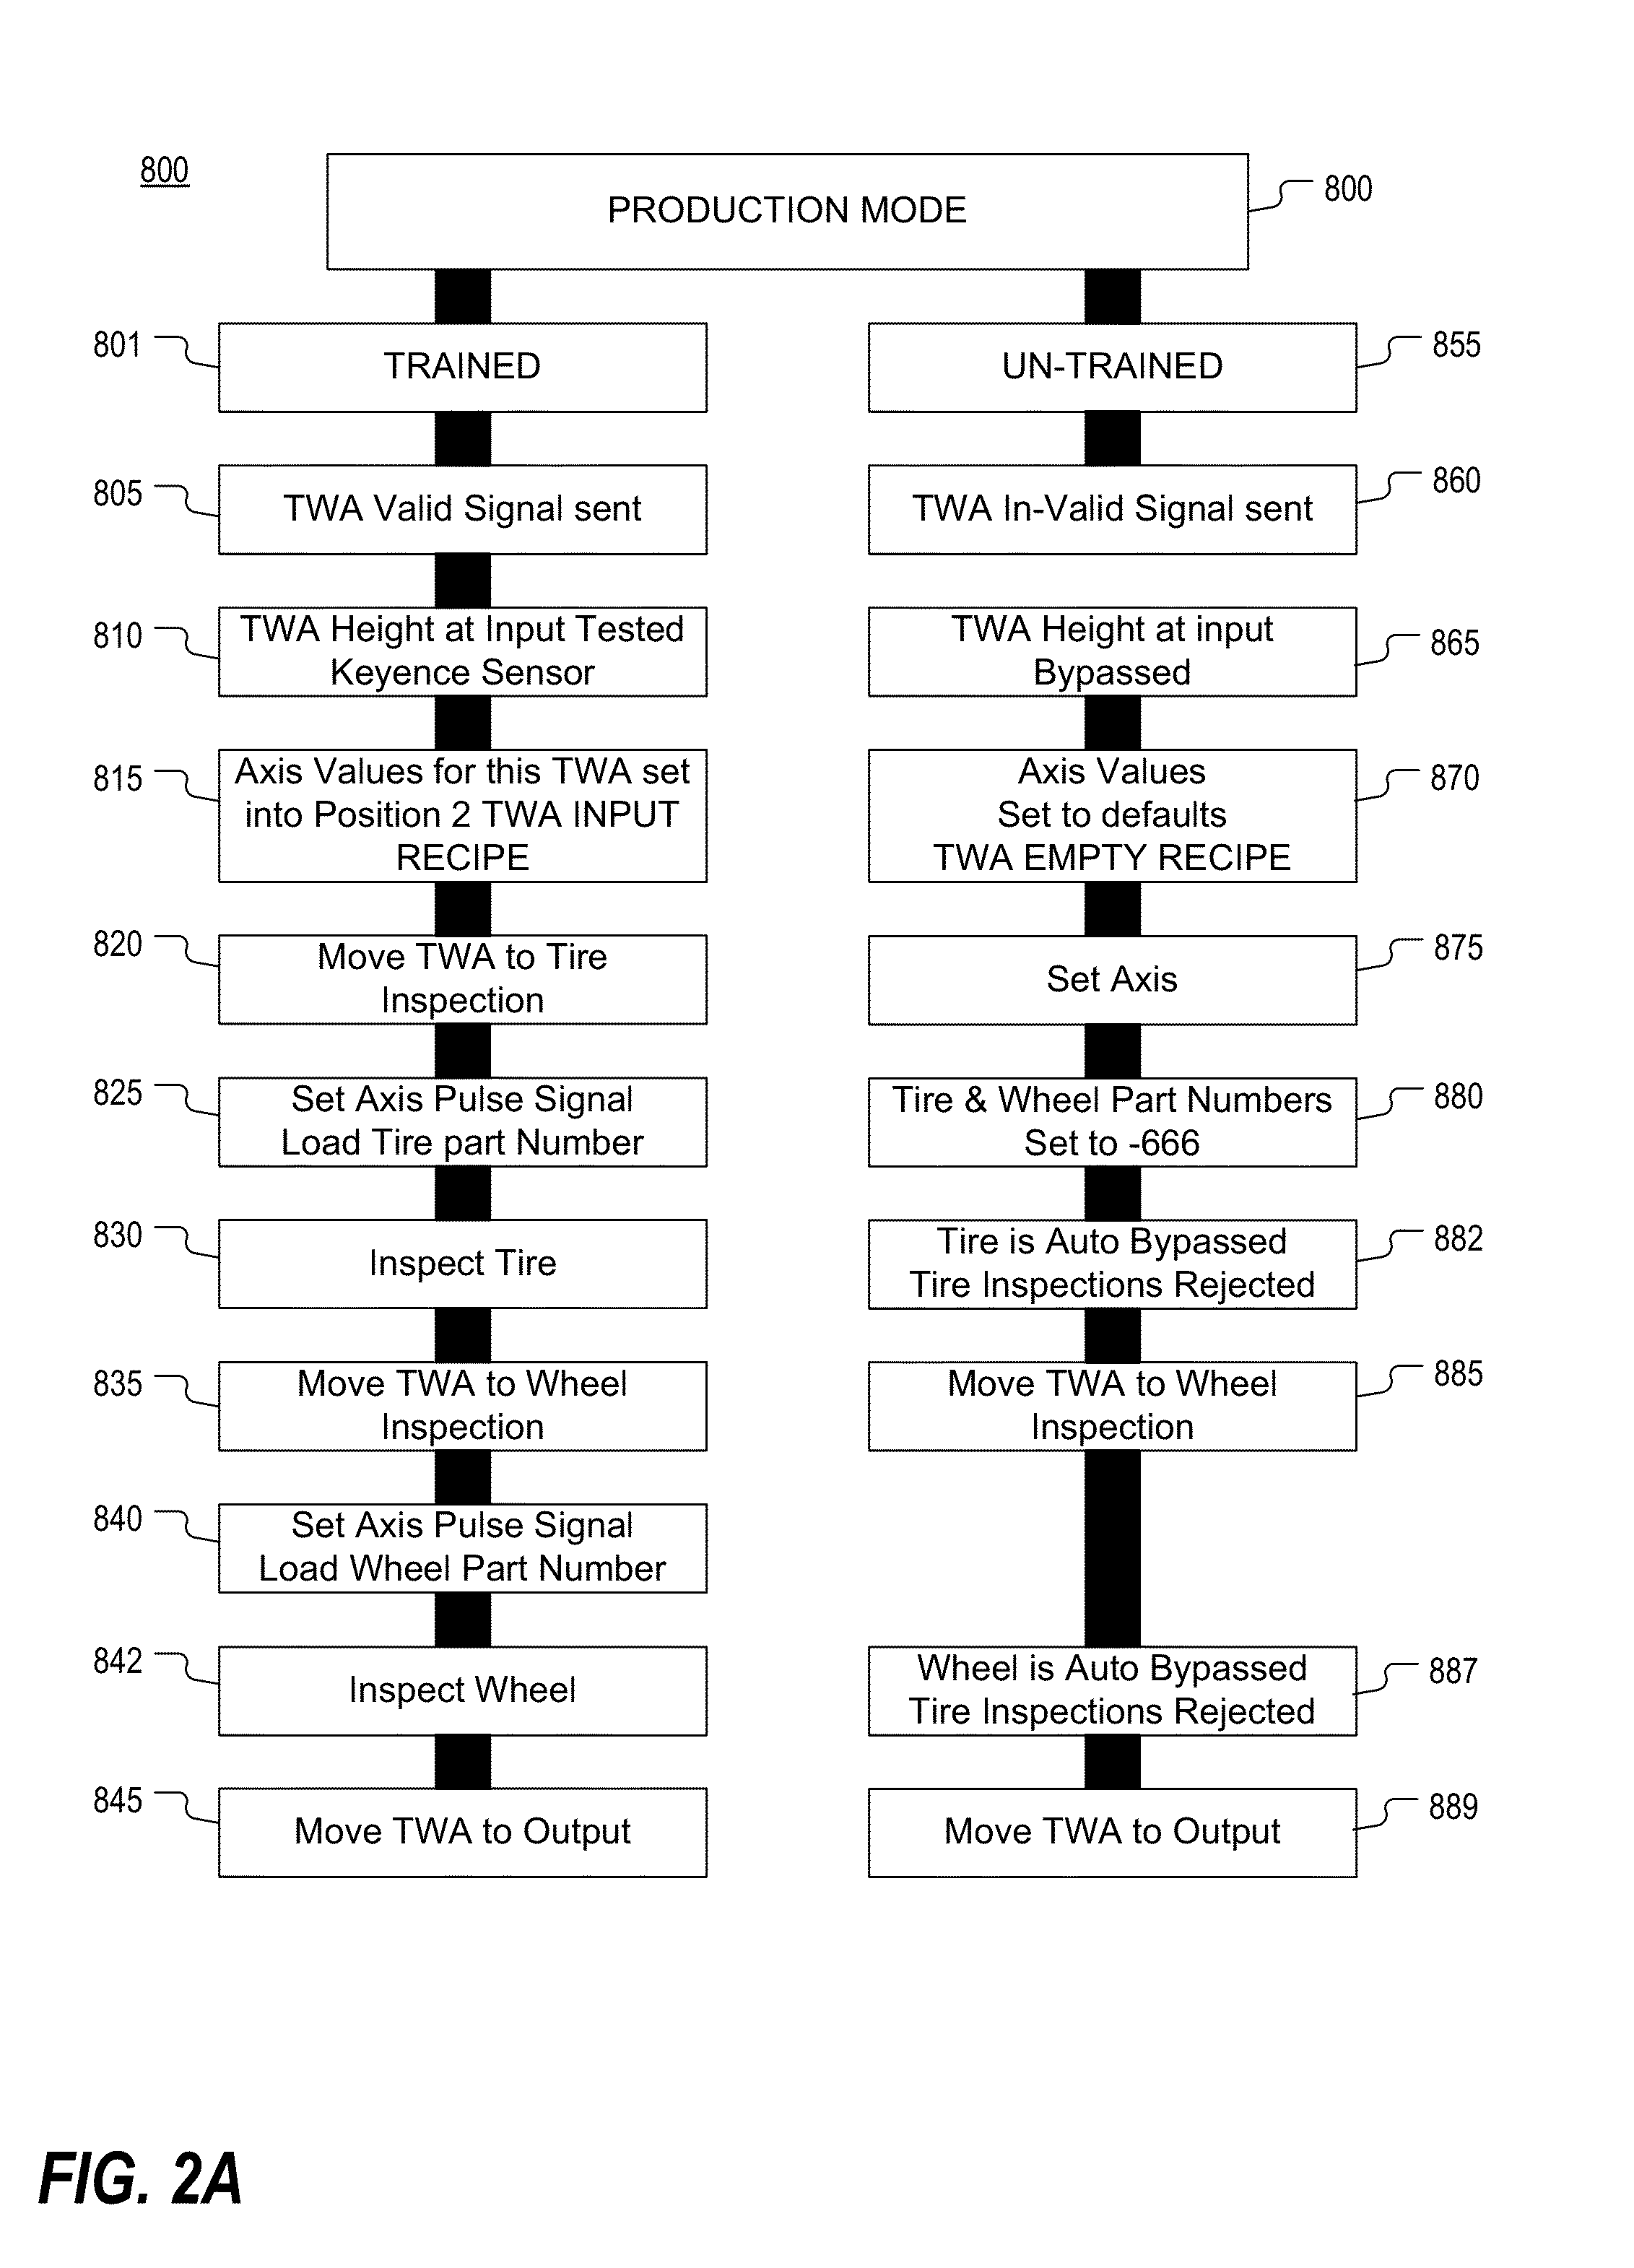 System and methods for inspecting tire wheel assemblies